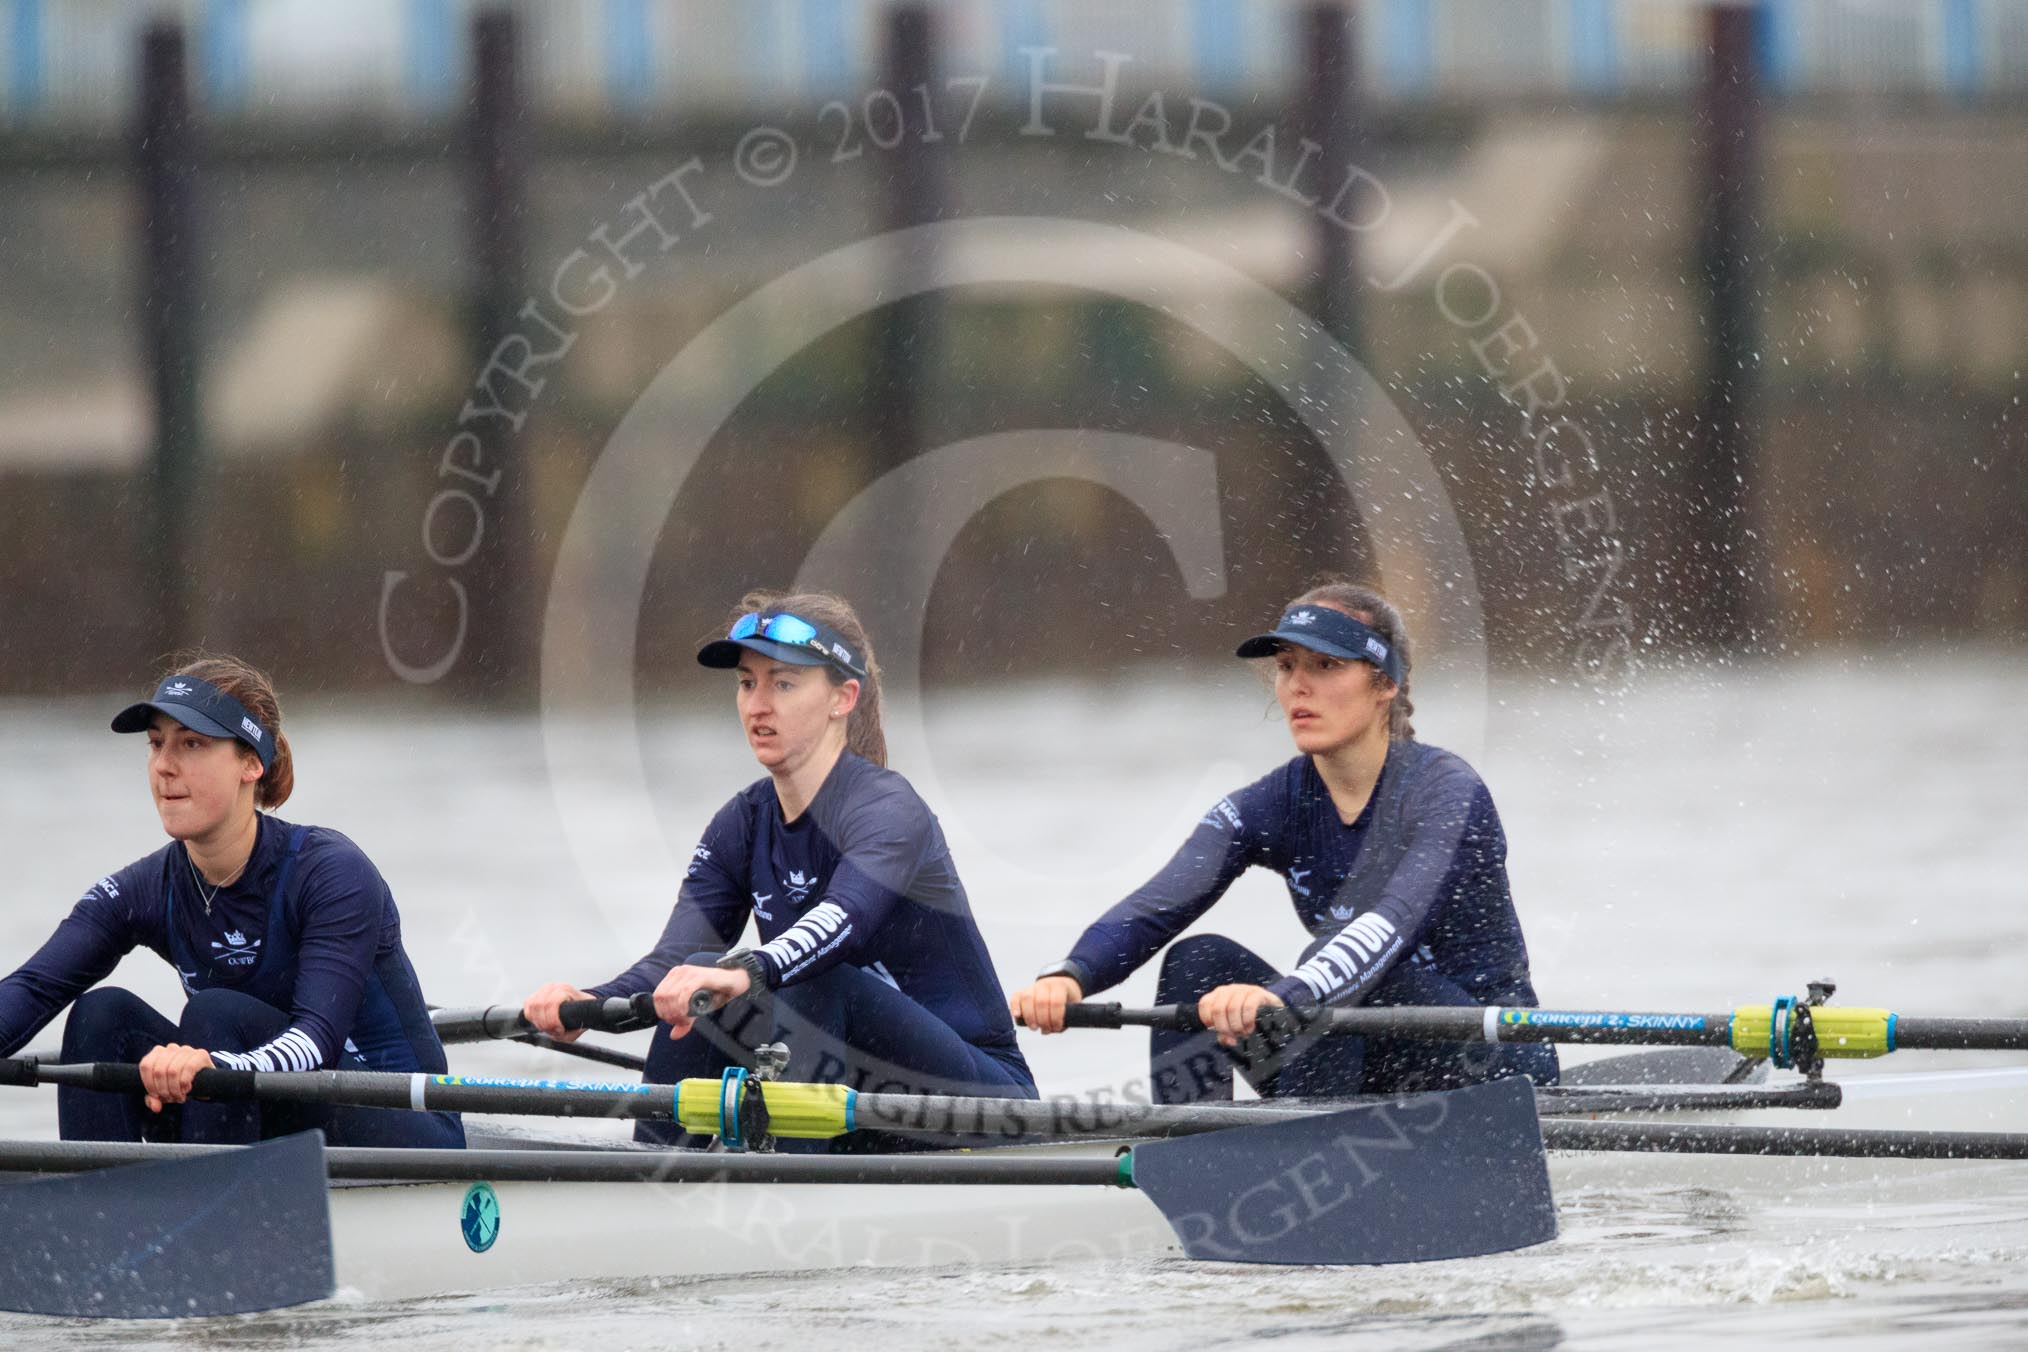 The Boat Race season 2018 - Women's Boat Race Trial Eights (OUWBC, Oxford): "Great Typhoon" , here 3 Madeline Goss, 2 Laura Depner, bow Matilda Edwards.
River Thames between Putney Bridge and Mortlake,
London SW15,

United Kingdom,
on 21 January 2018 at 14:27, image #51